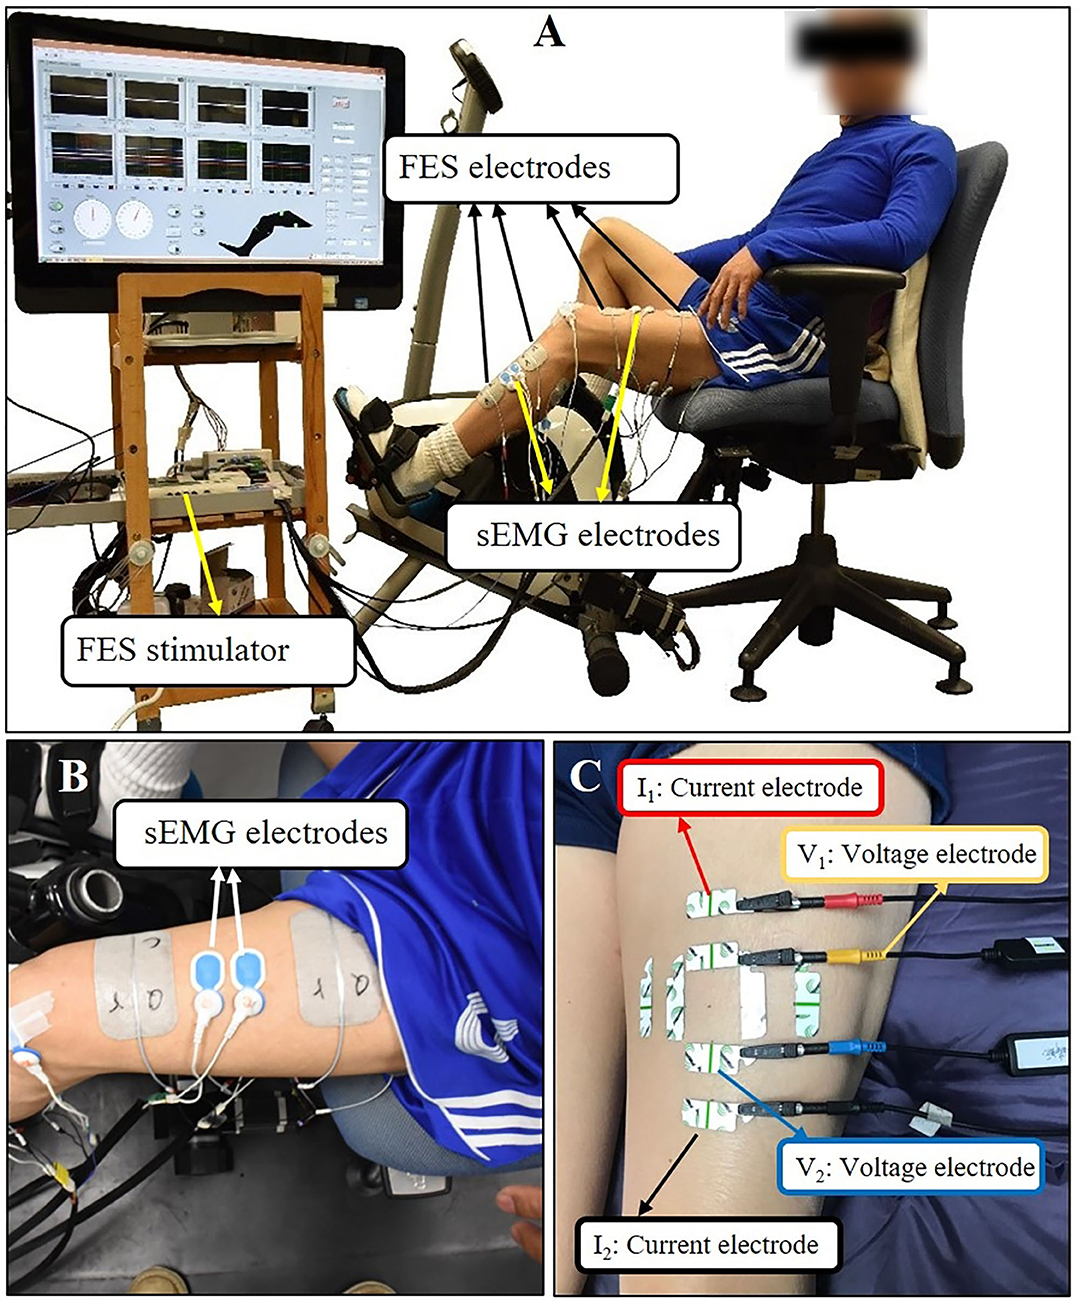 Electrical stimulation found to revitalize muscle perfusion caused